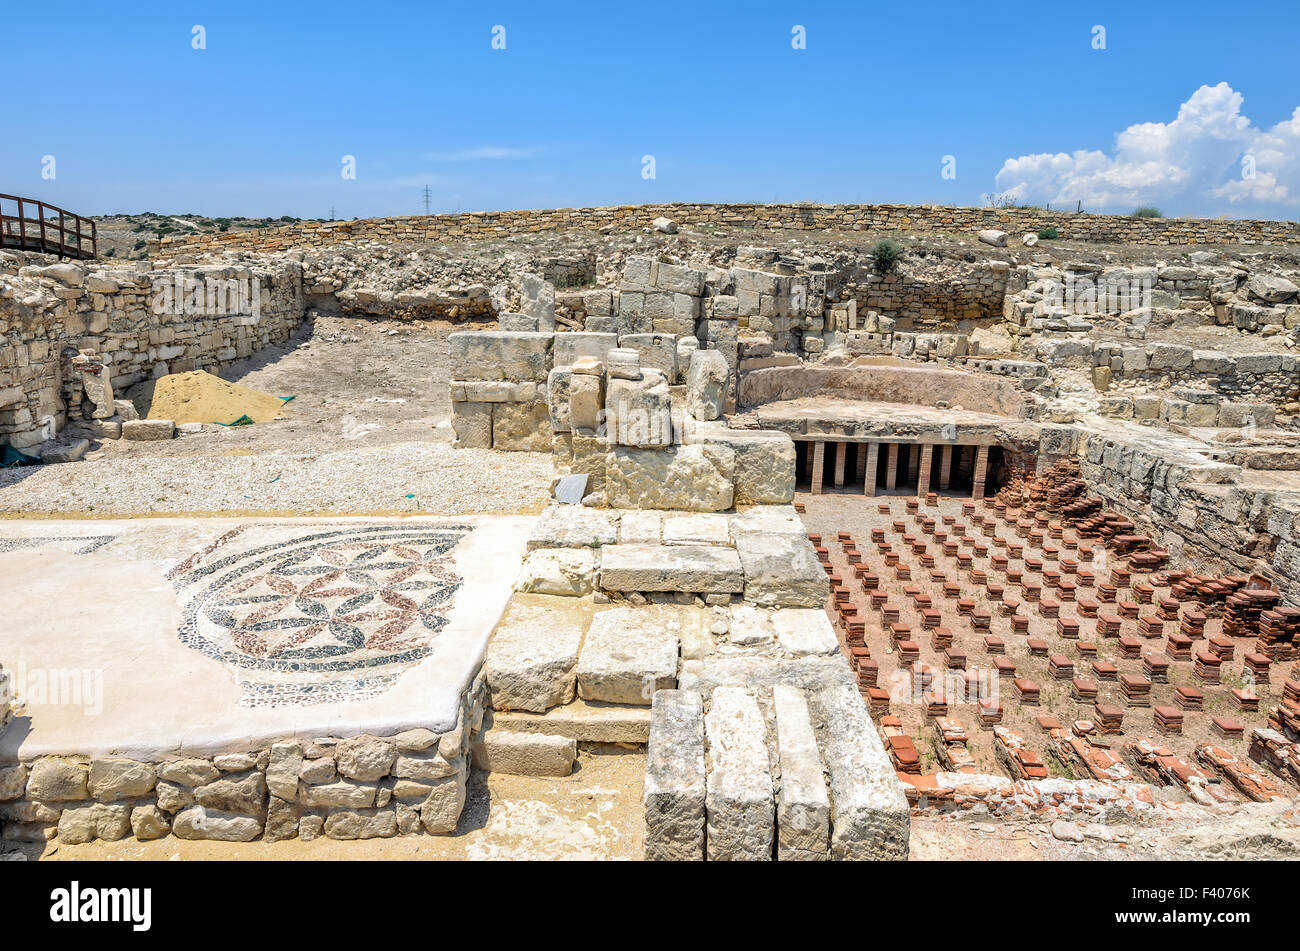 Ruins of ancient town Kourion on Cyprus Stock Photo